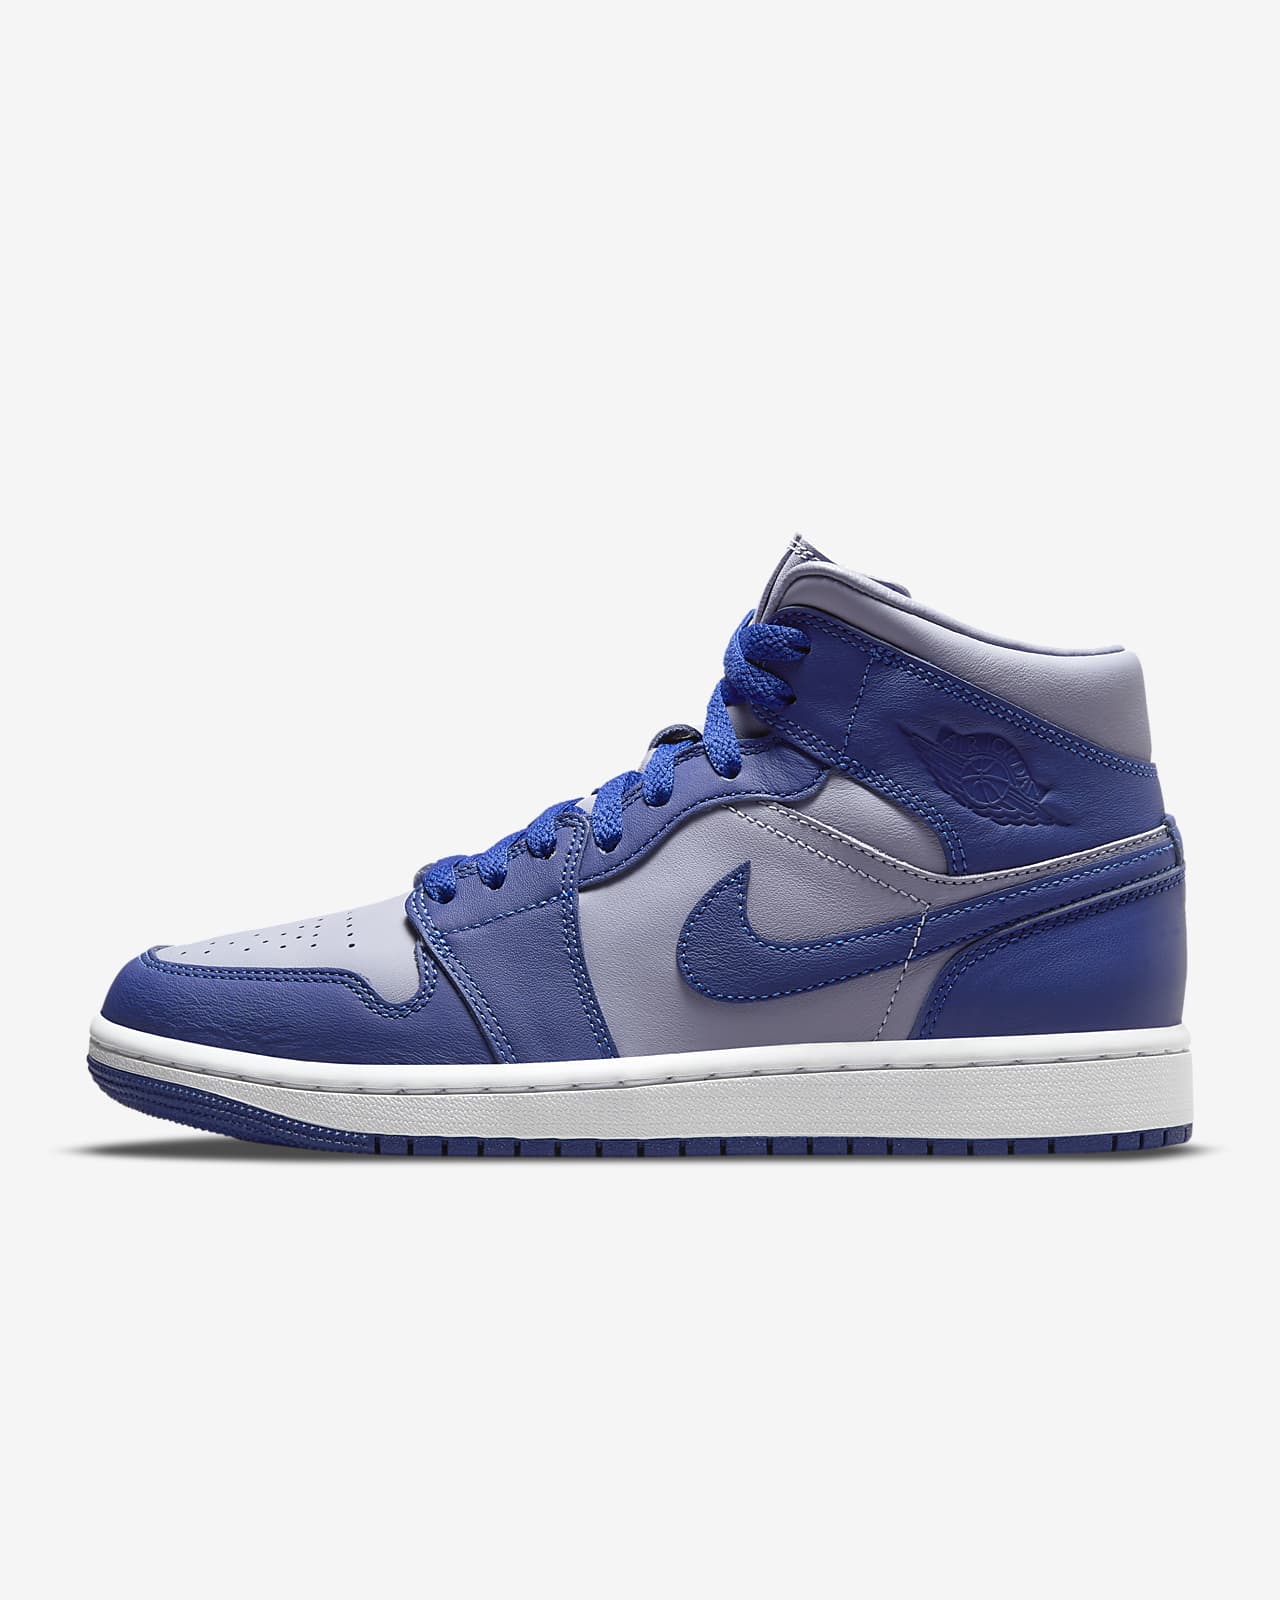 You searched for air jordan - Page 3 of 697 - Sneaker Steal : Sneaker Steal